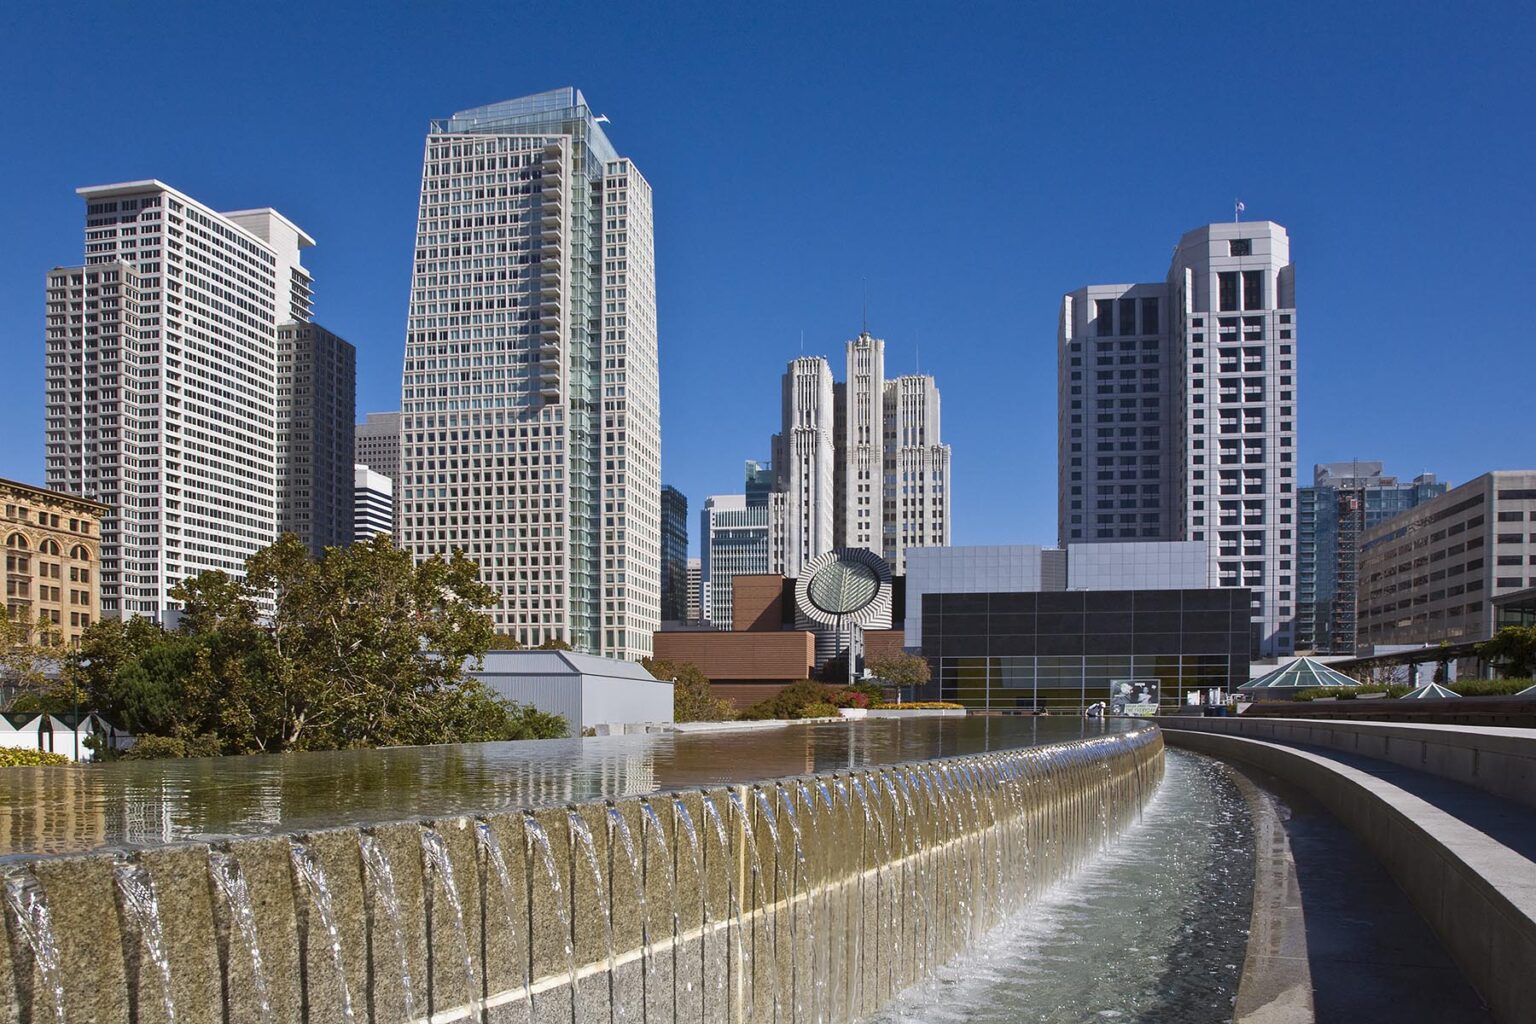 MARTIN LUTHER KING MEMORIAL WATER FOUNTAIN and the San Francisco Modern Art Museum from the YERBA BUENA CENTER - SAN FRANCISCO, CALIFORNIA